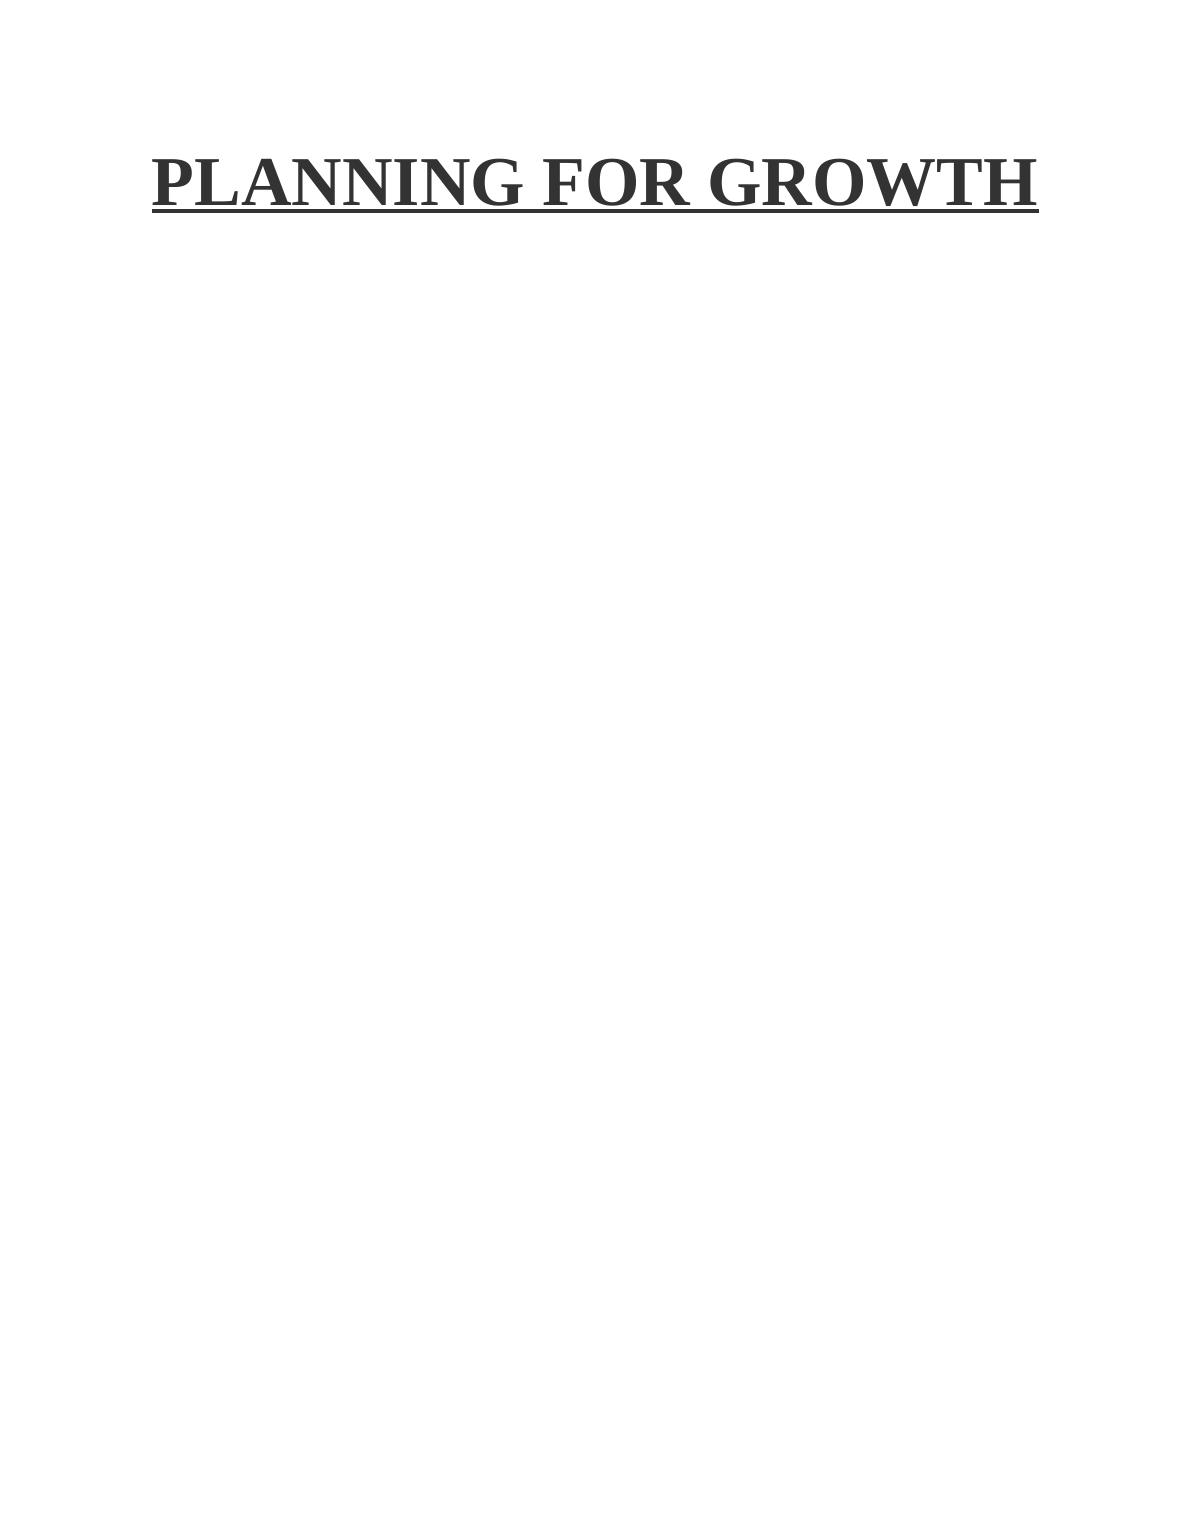 Planning for Growth: Evaluating Opportunities, Funding Sources, and Business Plan_1